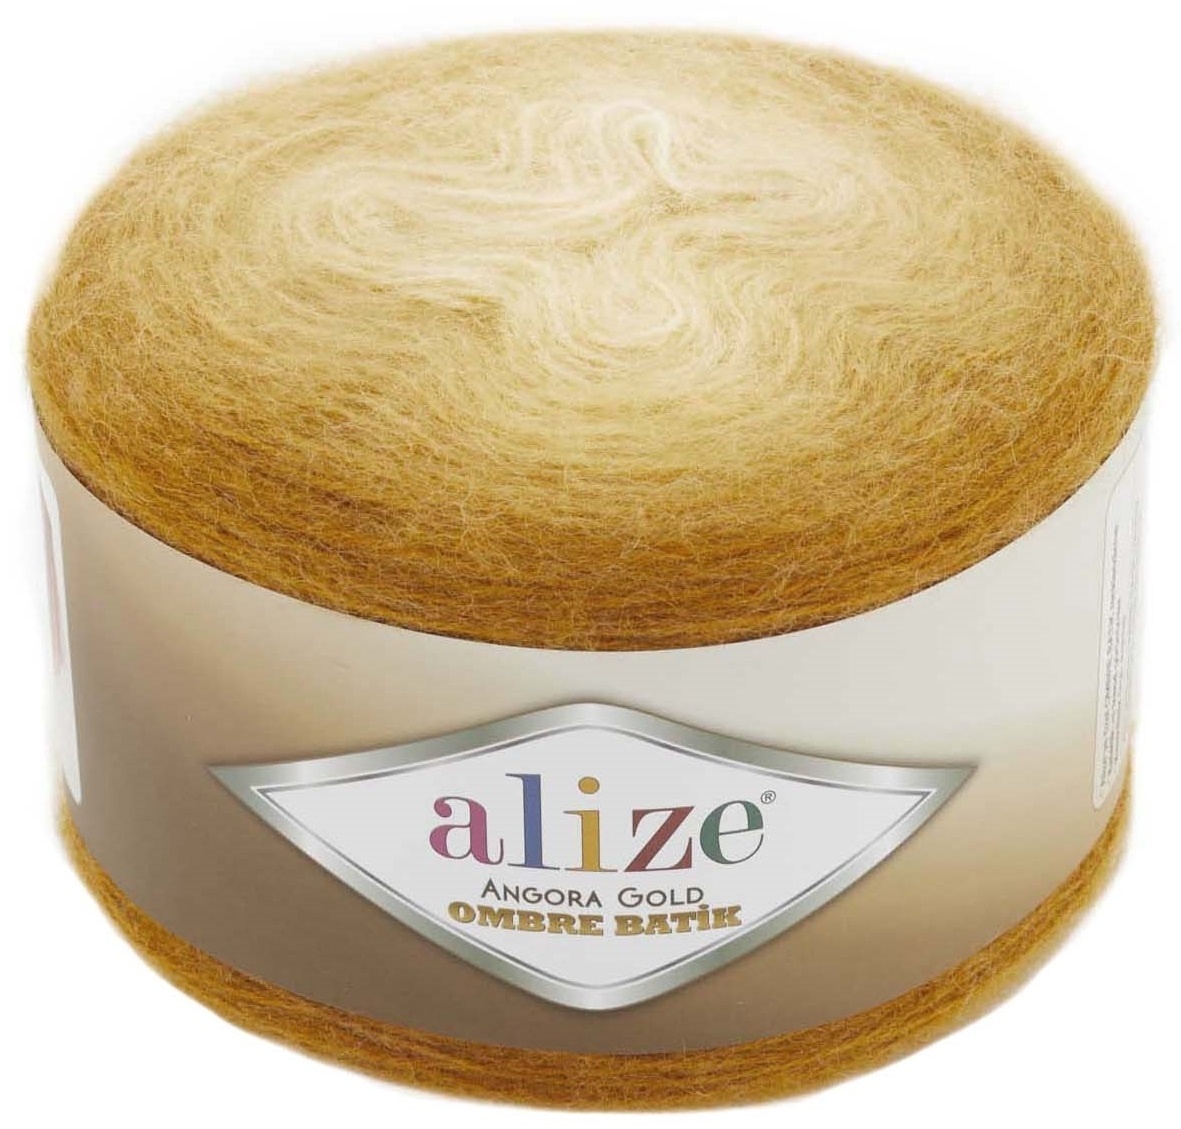 Alize Angora Gold Ombre Batik, 20% Wool, 80% Acrylic 4 Skein Value Pack, 600g фото 17